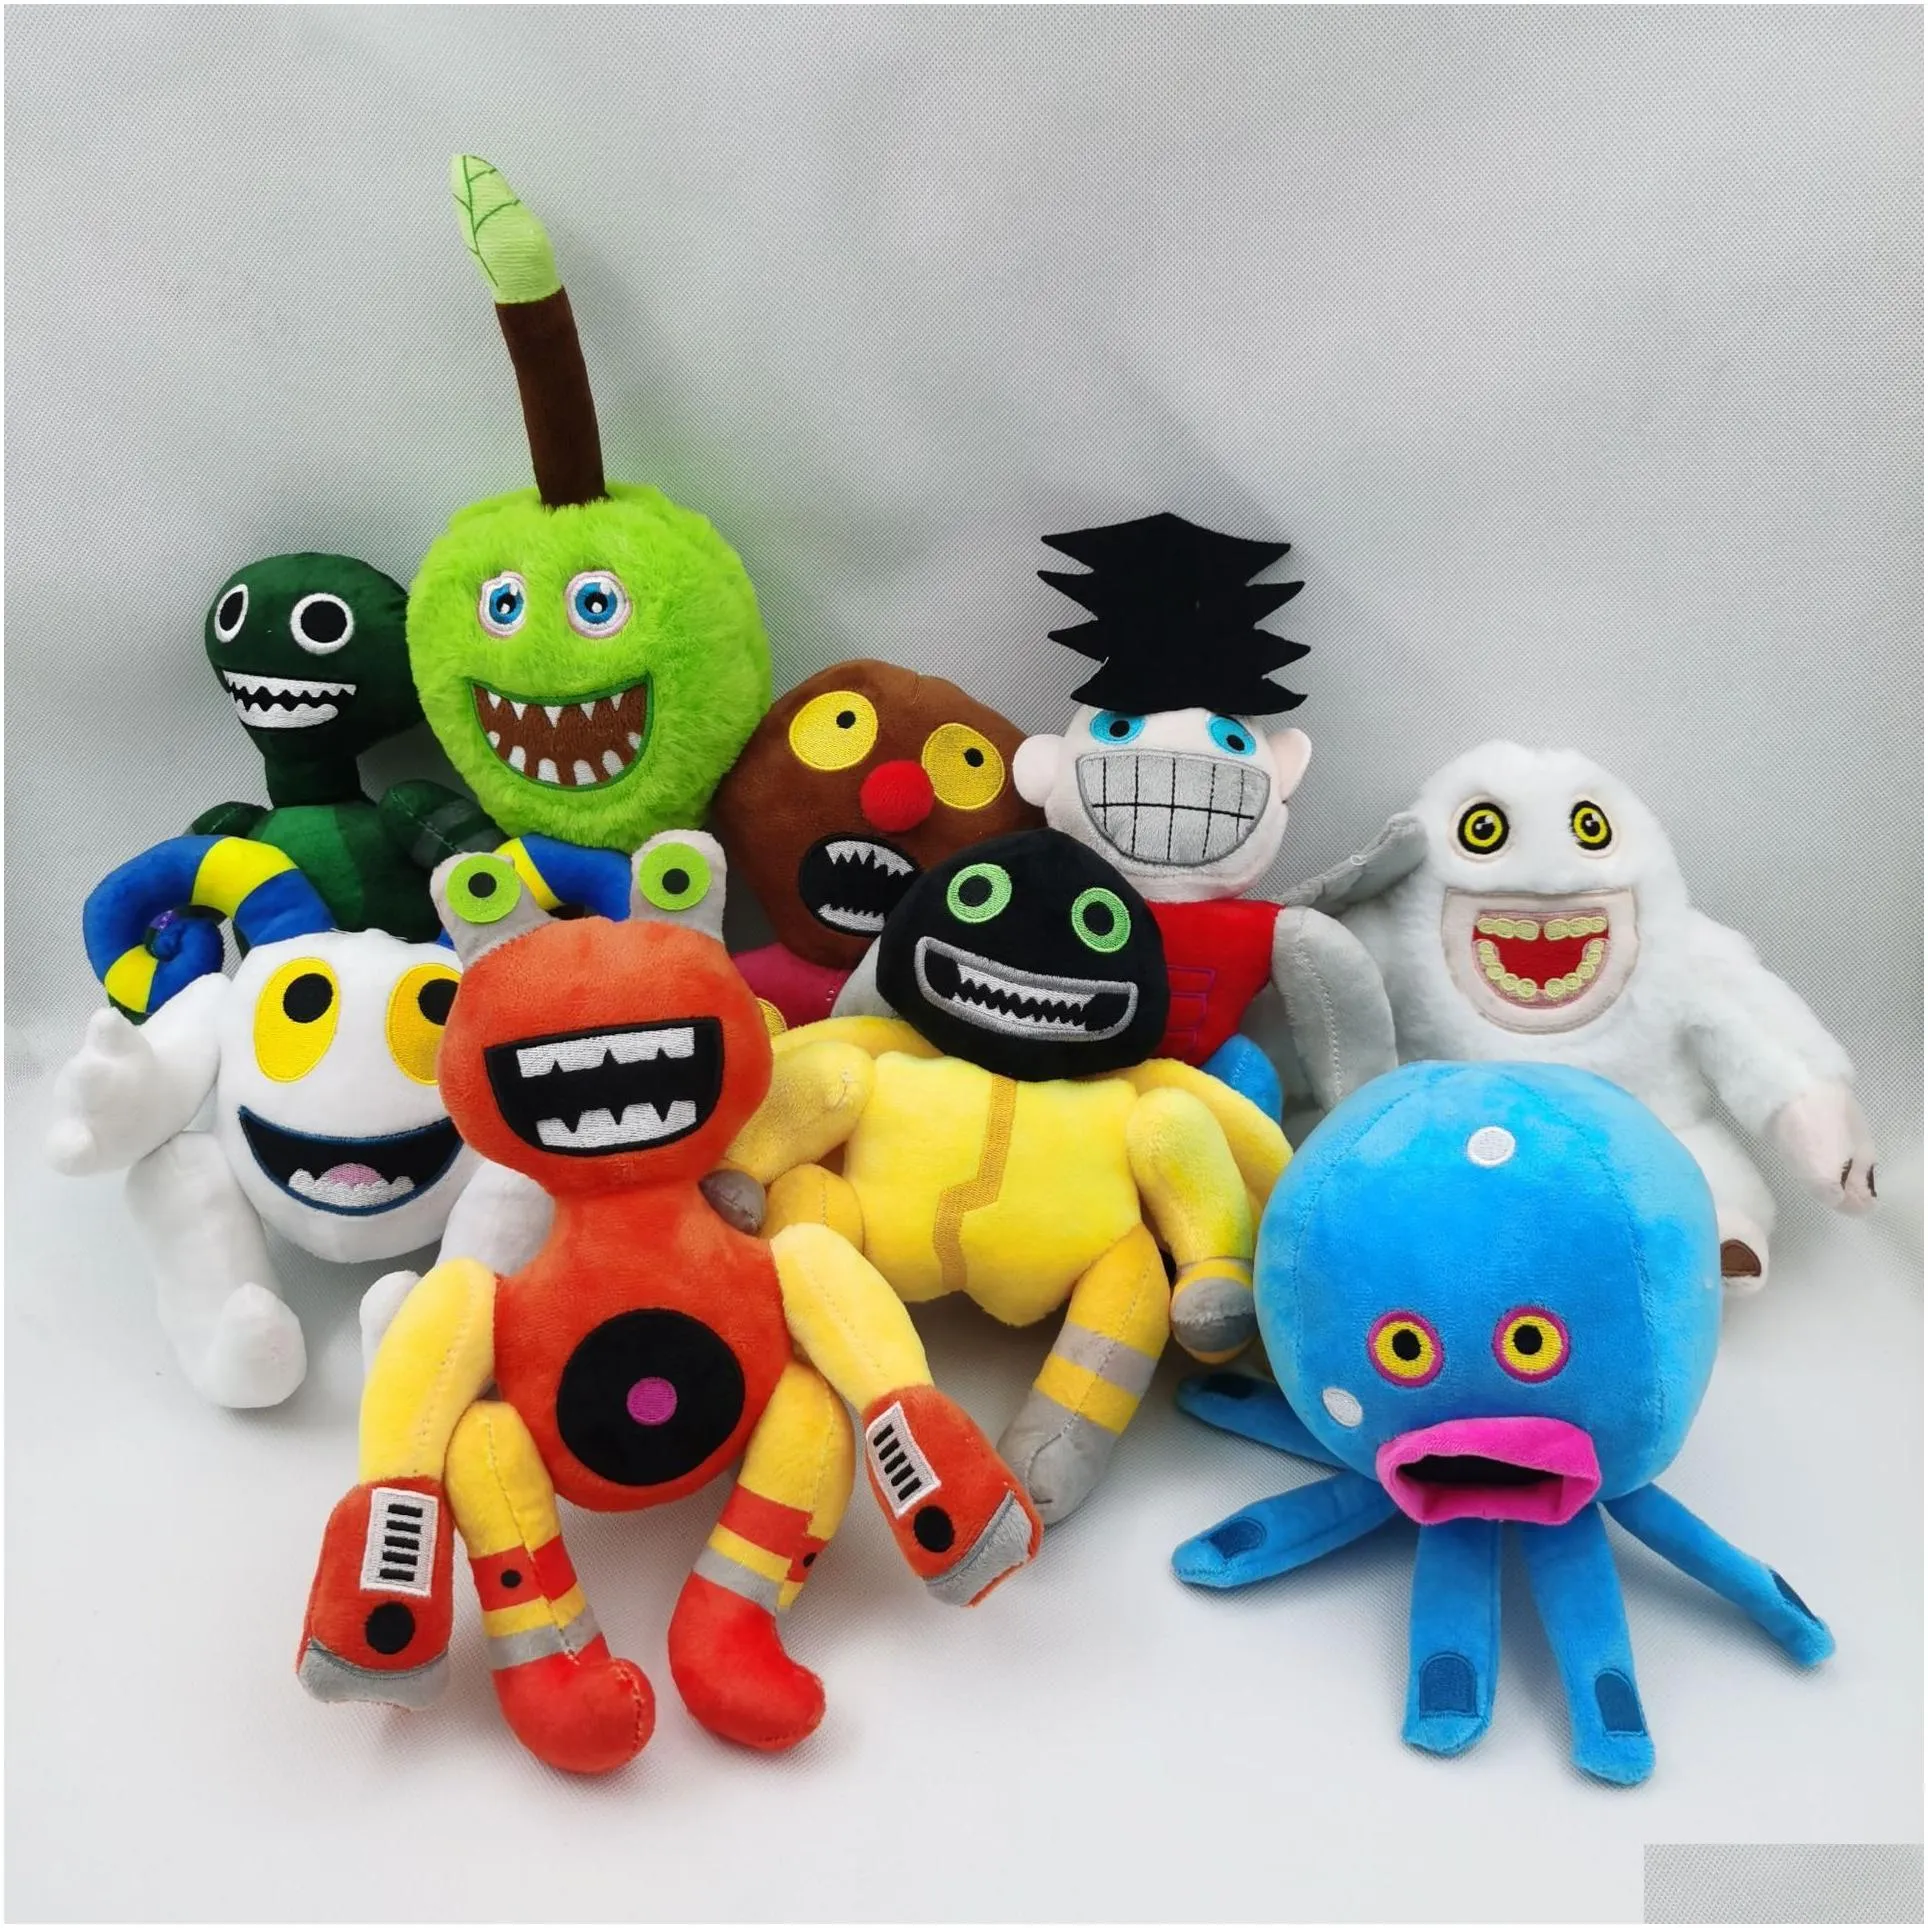 ivcsatb my singing monster plush toys, wubbox plush toys, soft stuffed animal plush dolls, wholesale of gifts for game fans